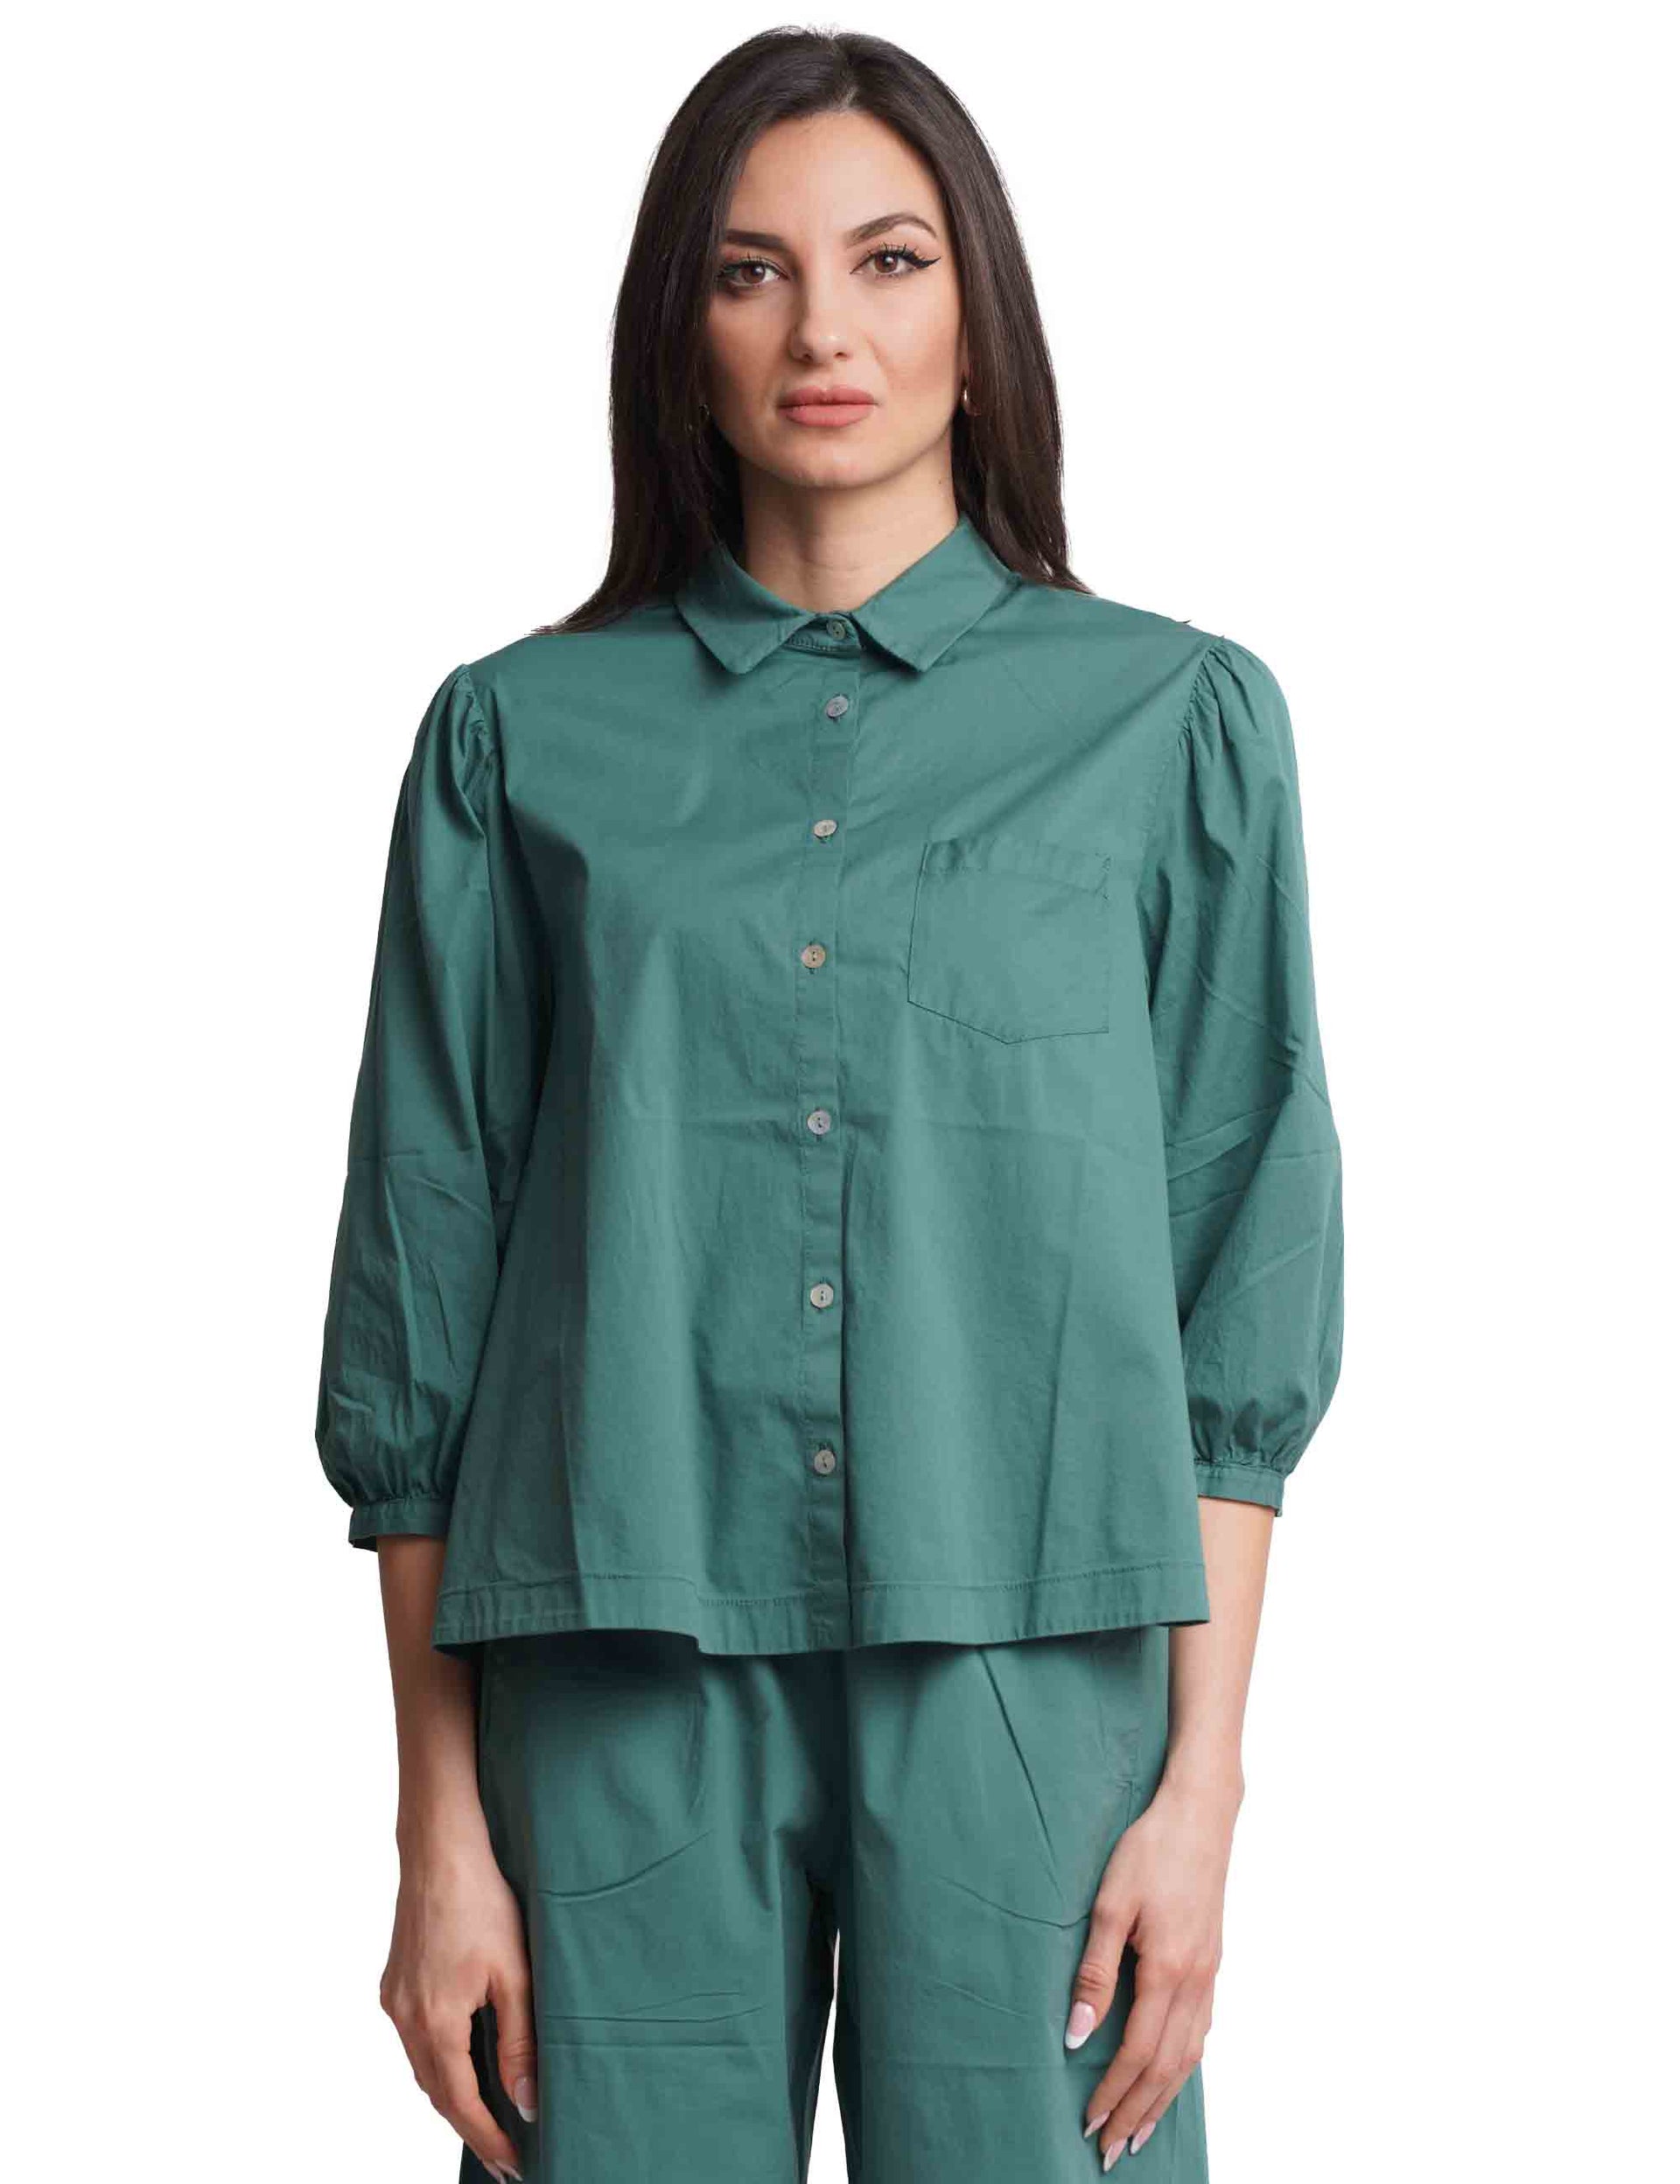 Women's green cotton shirts with puff sleeves